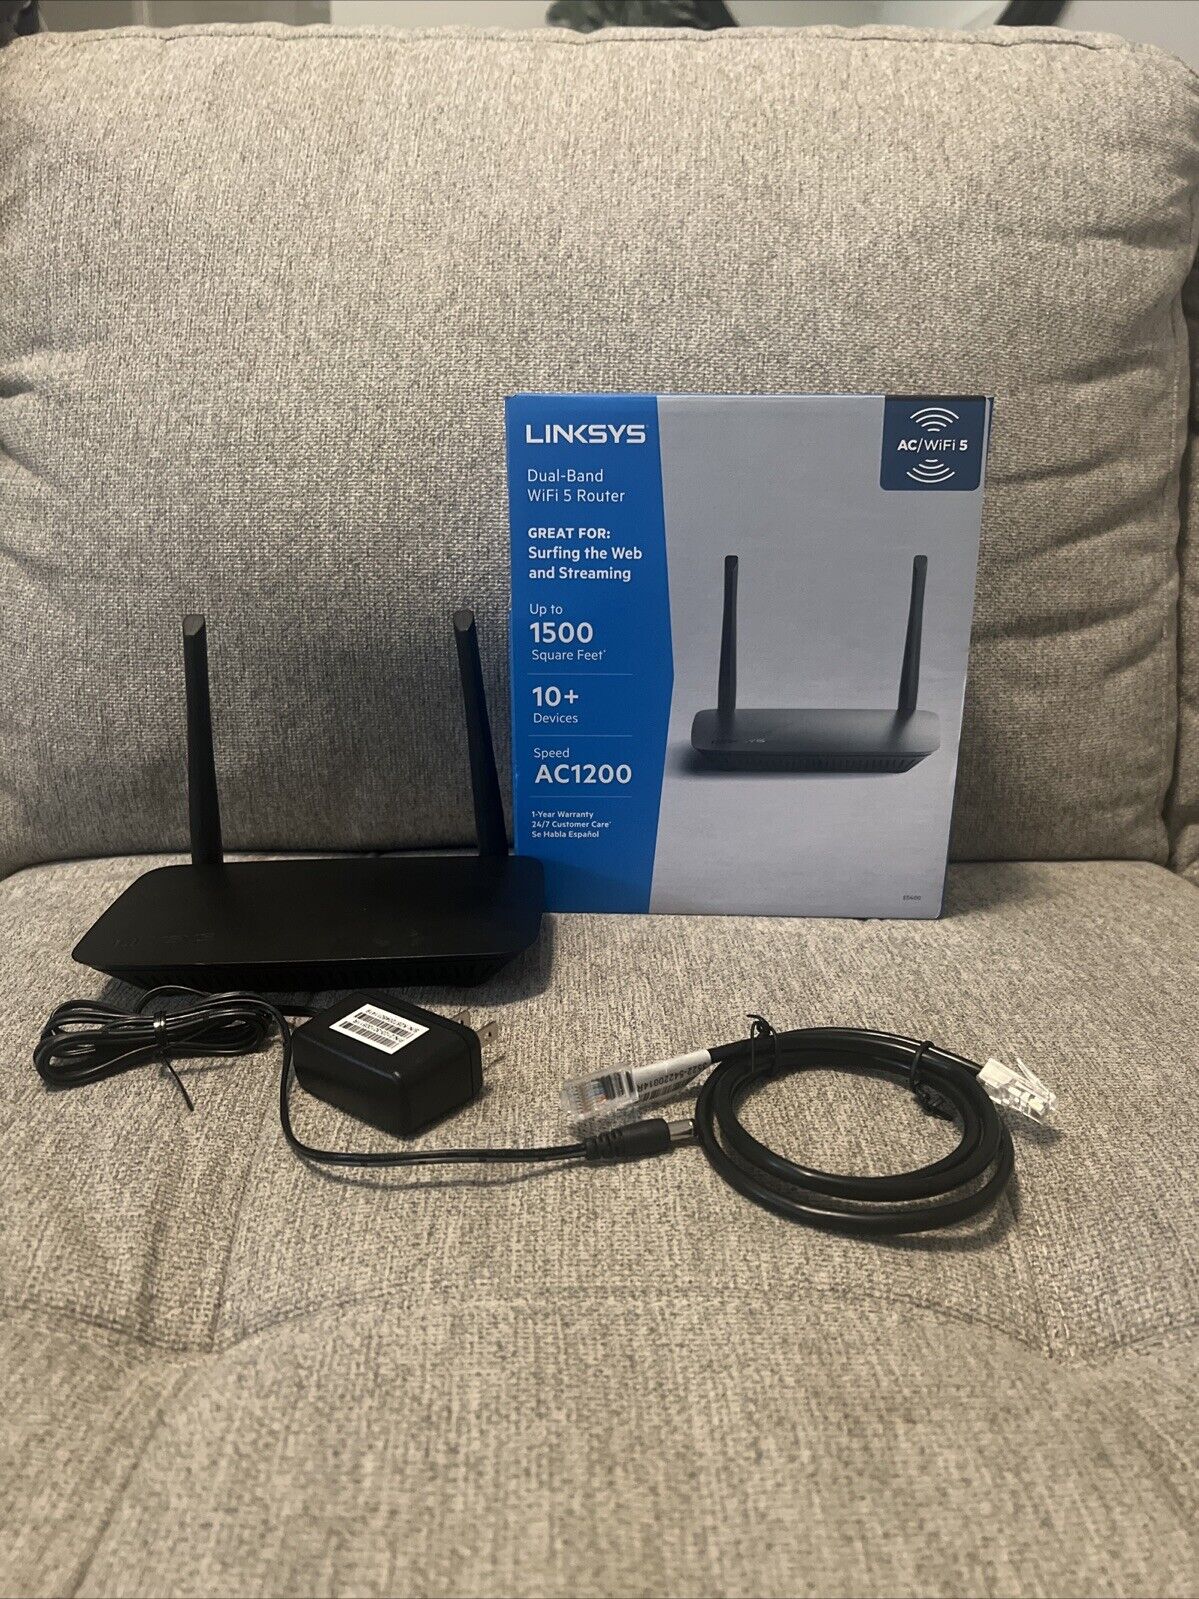 Linksys AC1200 1.2 Gbps Speed WiFi Router - E5400